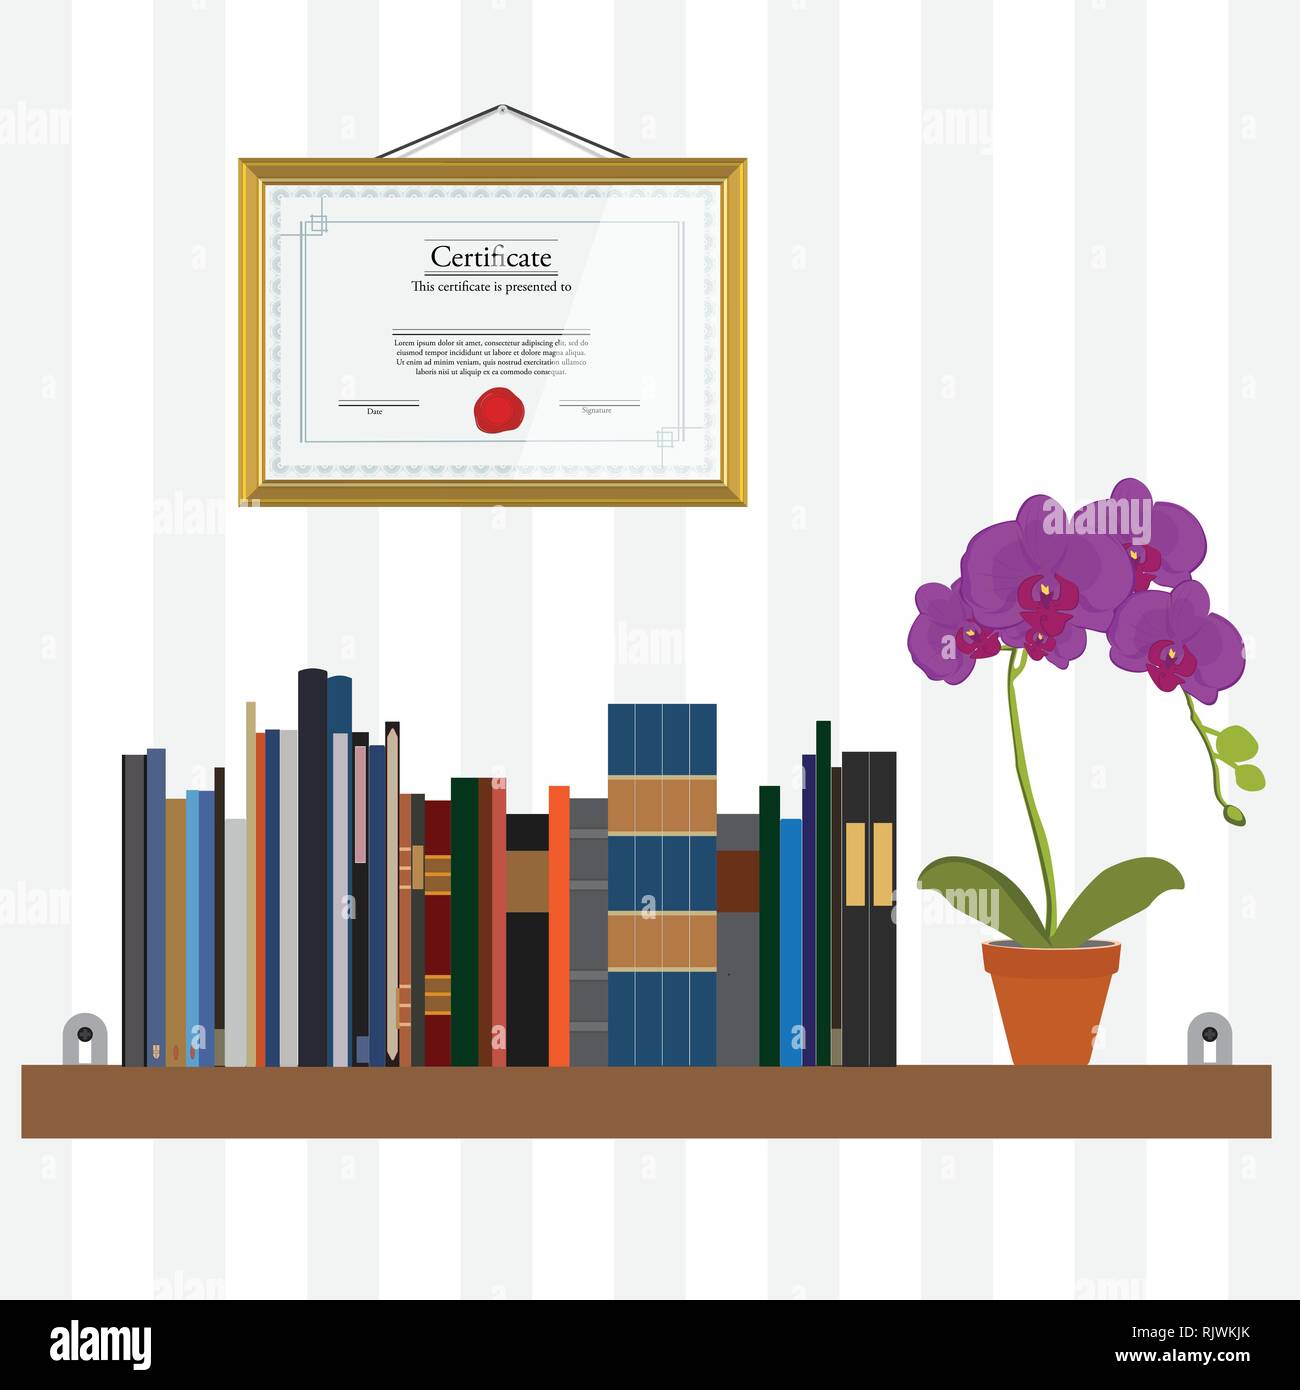 Vector illustration bookshelf with bibliography, encyclopedia, handbooks and orchid flower. Certificate on the wall. Stock Vector